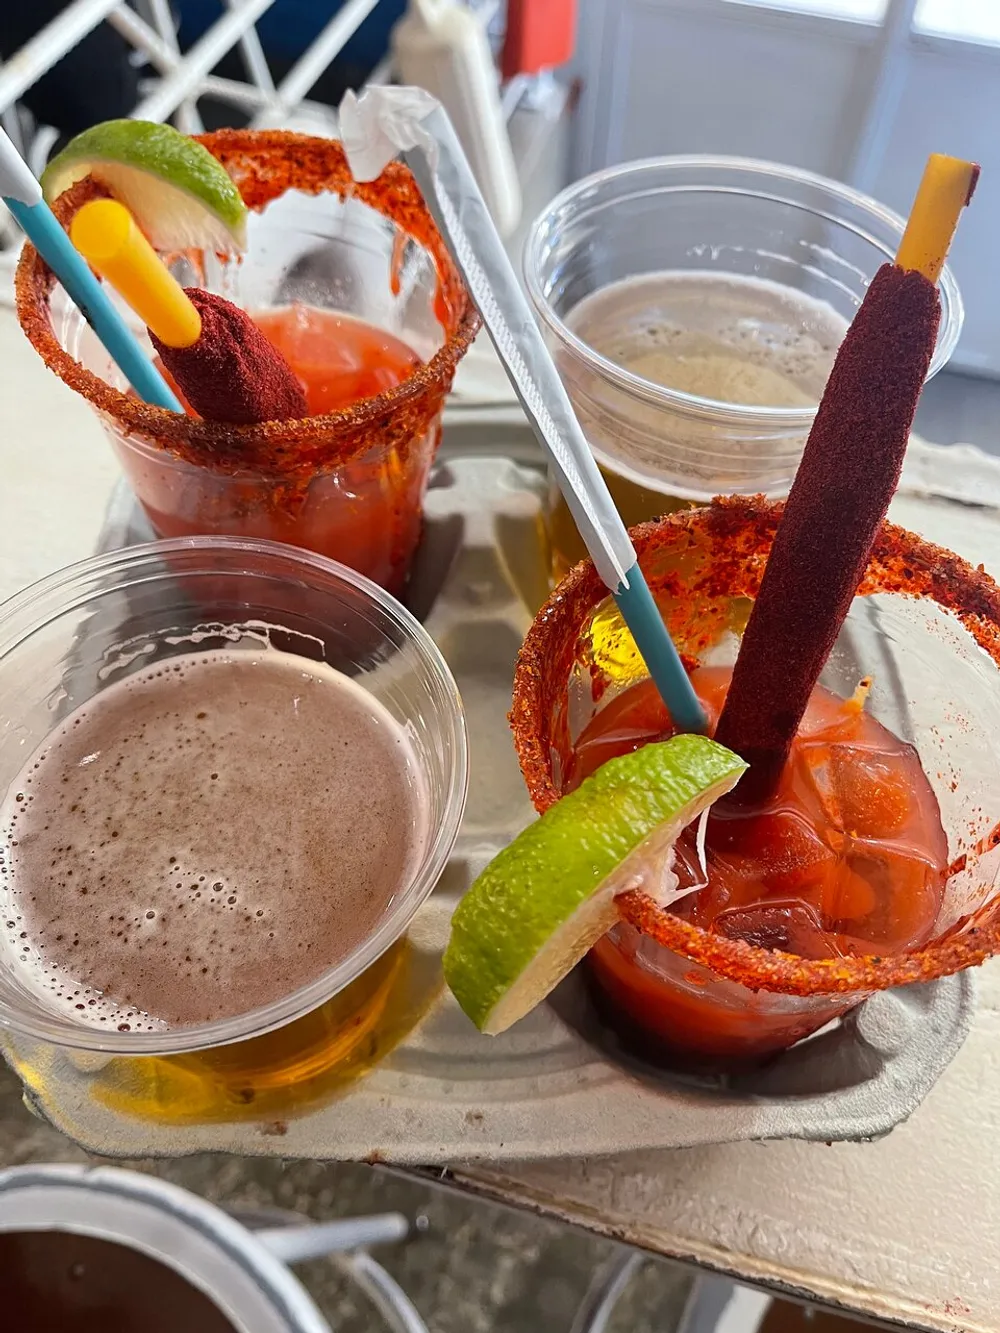 The image shows an assortment of drinks including what appears to be a bloody mary and beers garnished with lime and dressed with a spice rim and snack sticks served on a tray